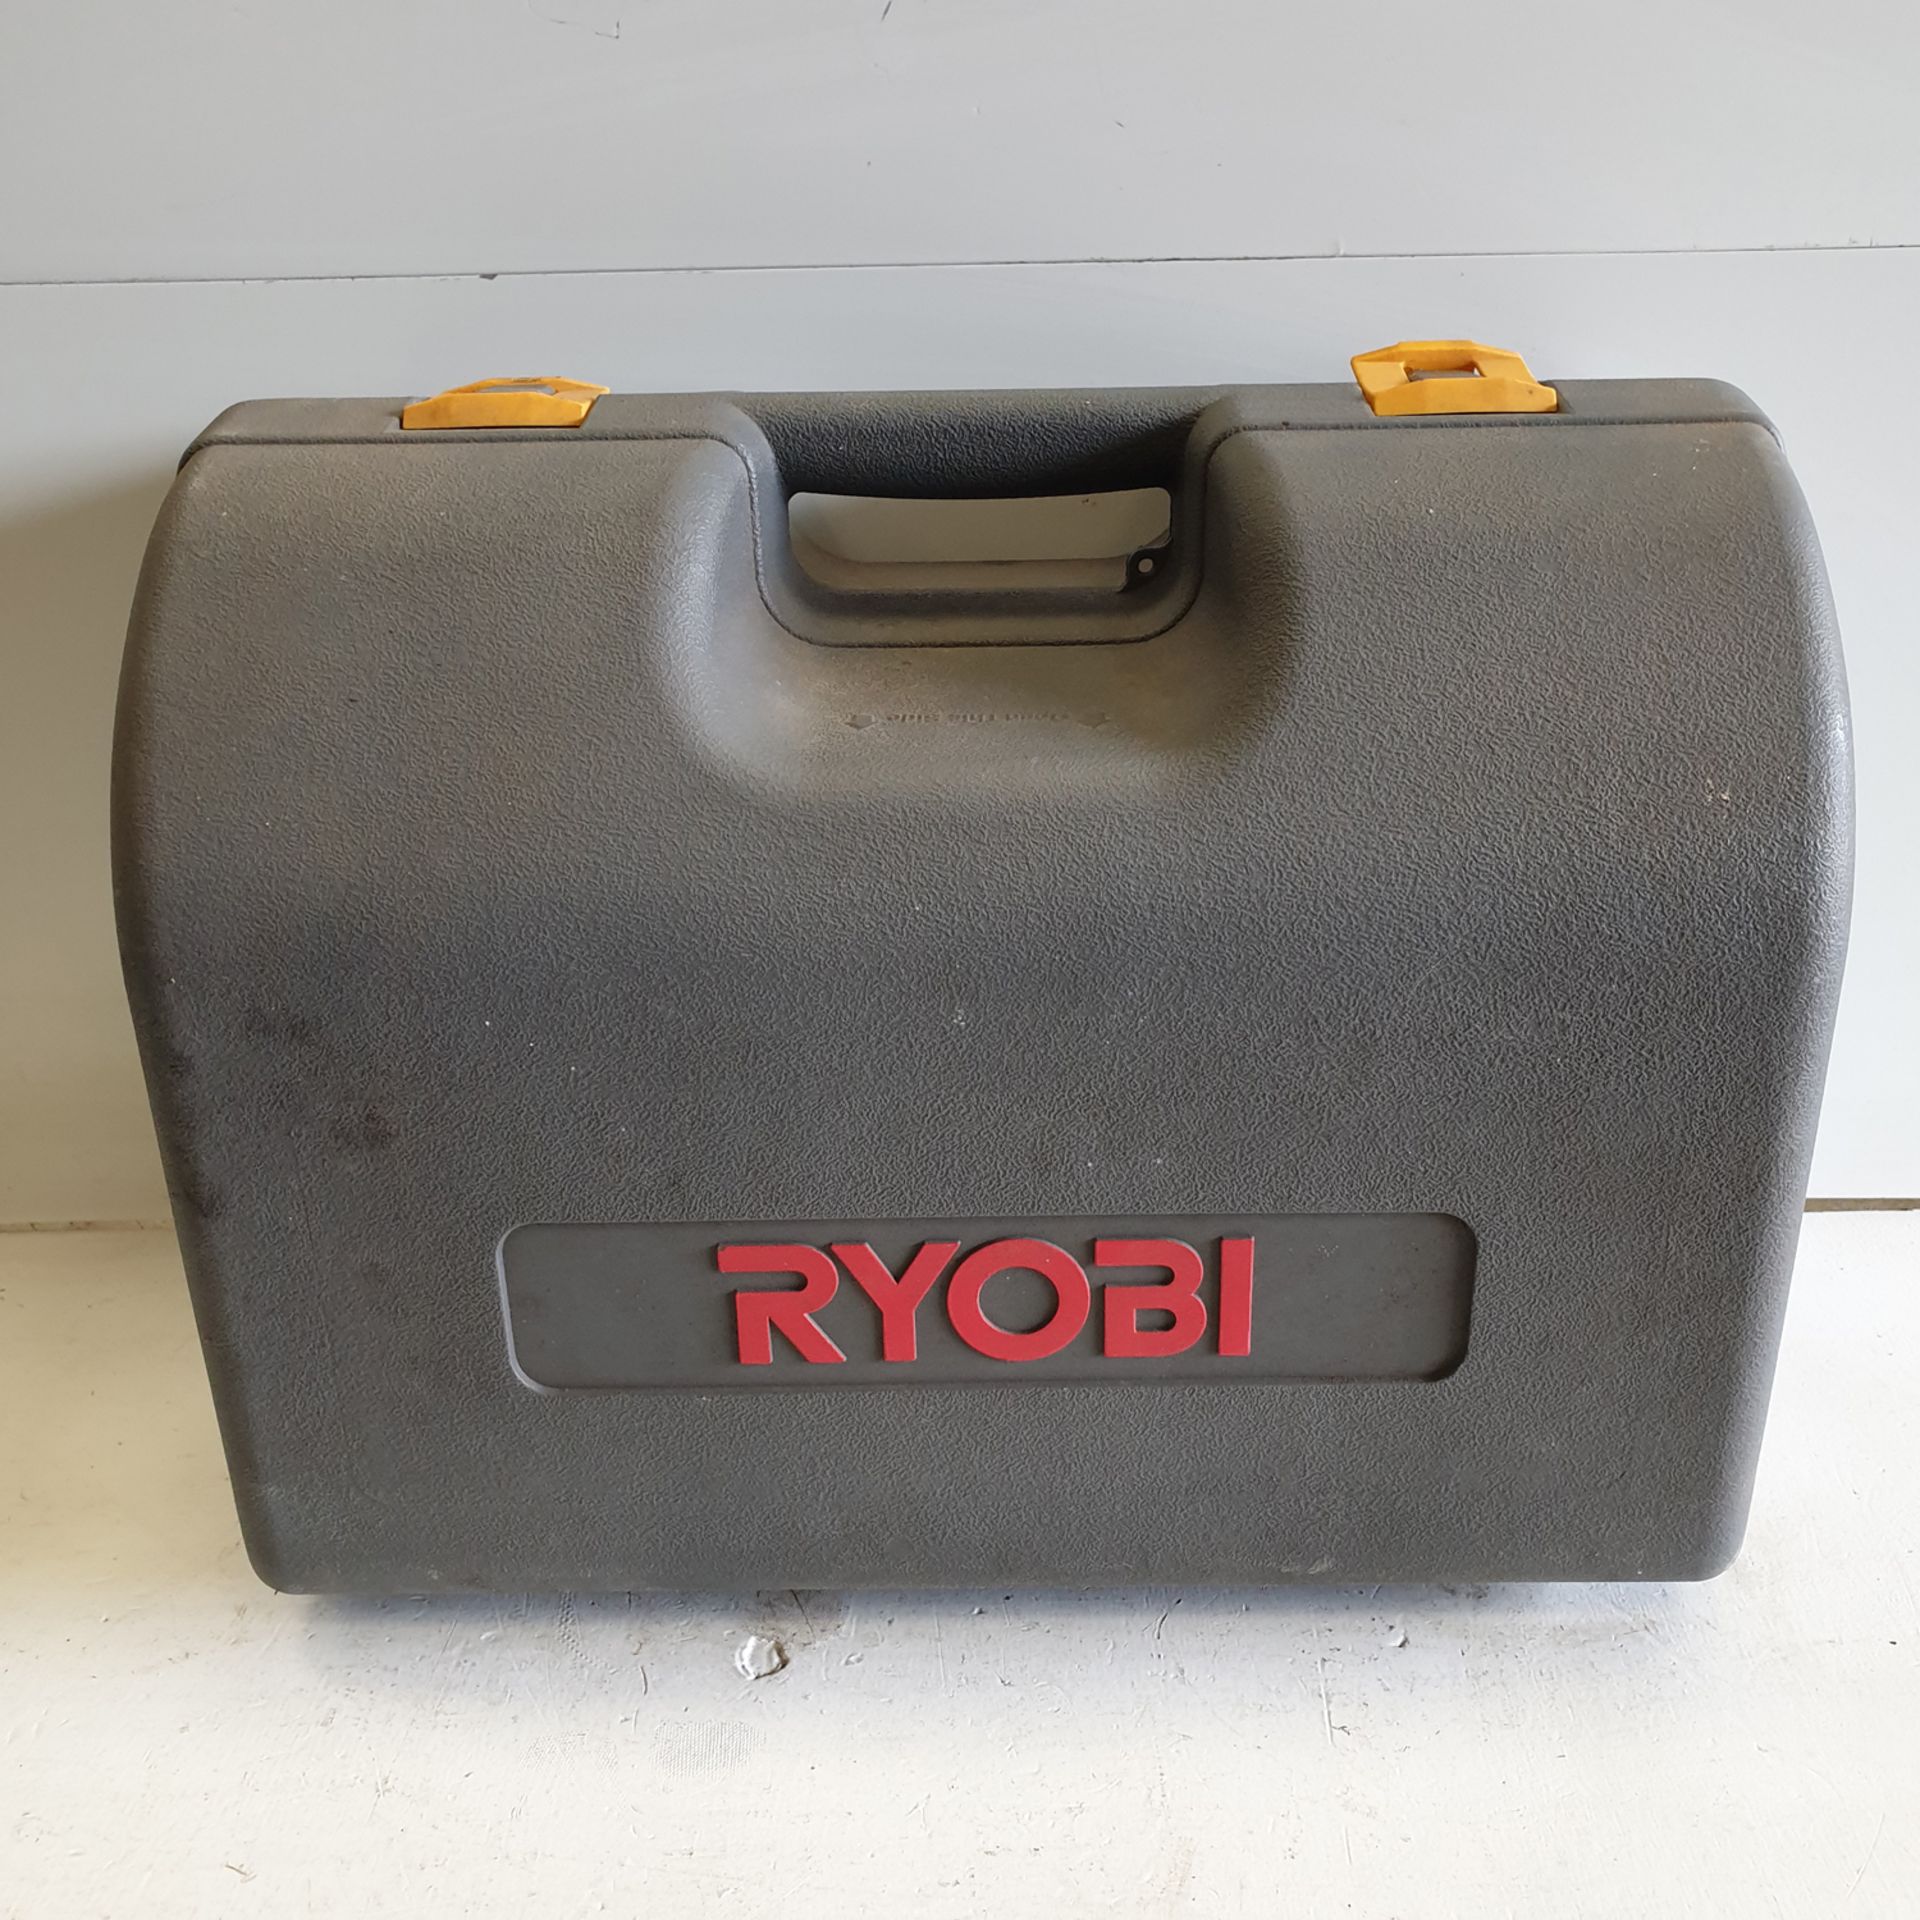 RYOBI Cordless Circular Saw. 18V. With Battery & Charger. With Instructions. In Box. - Image 6 of 6